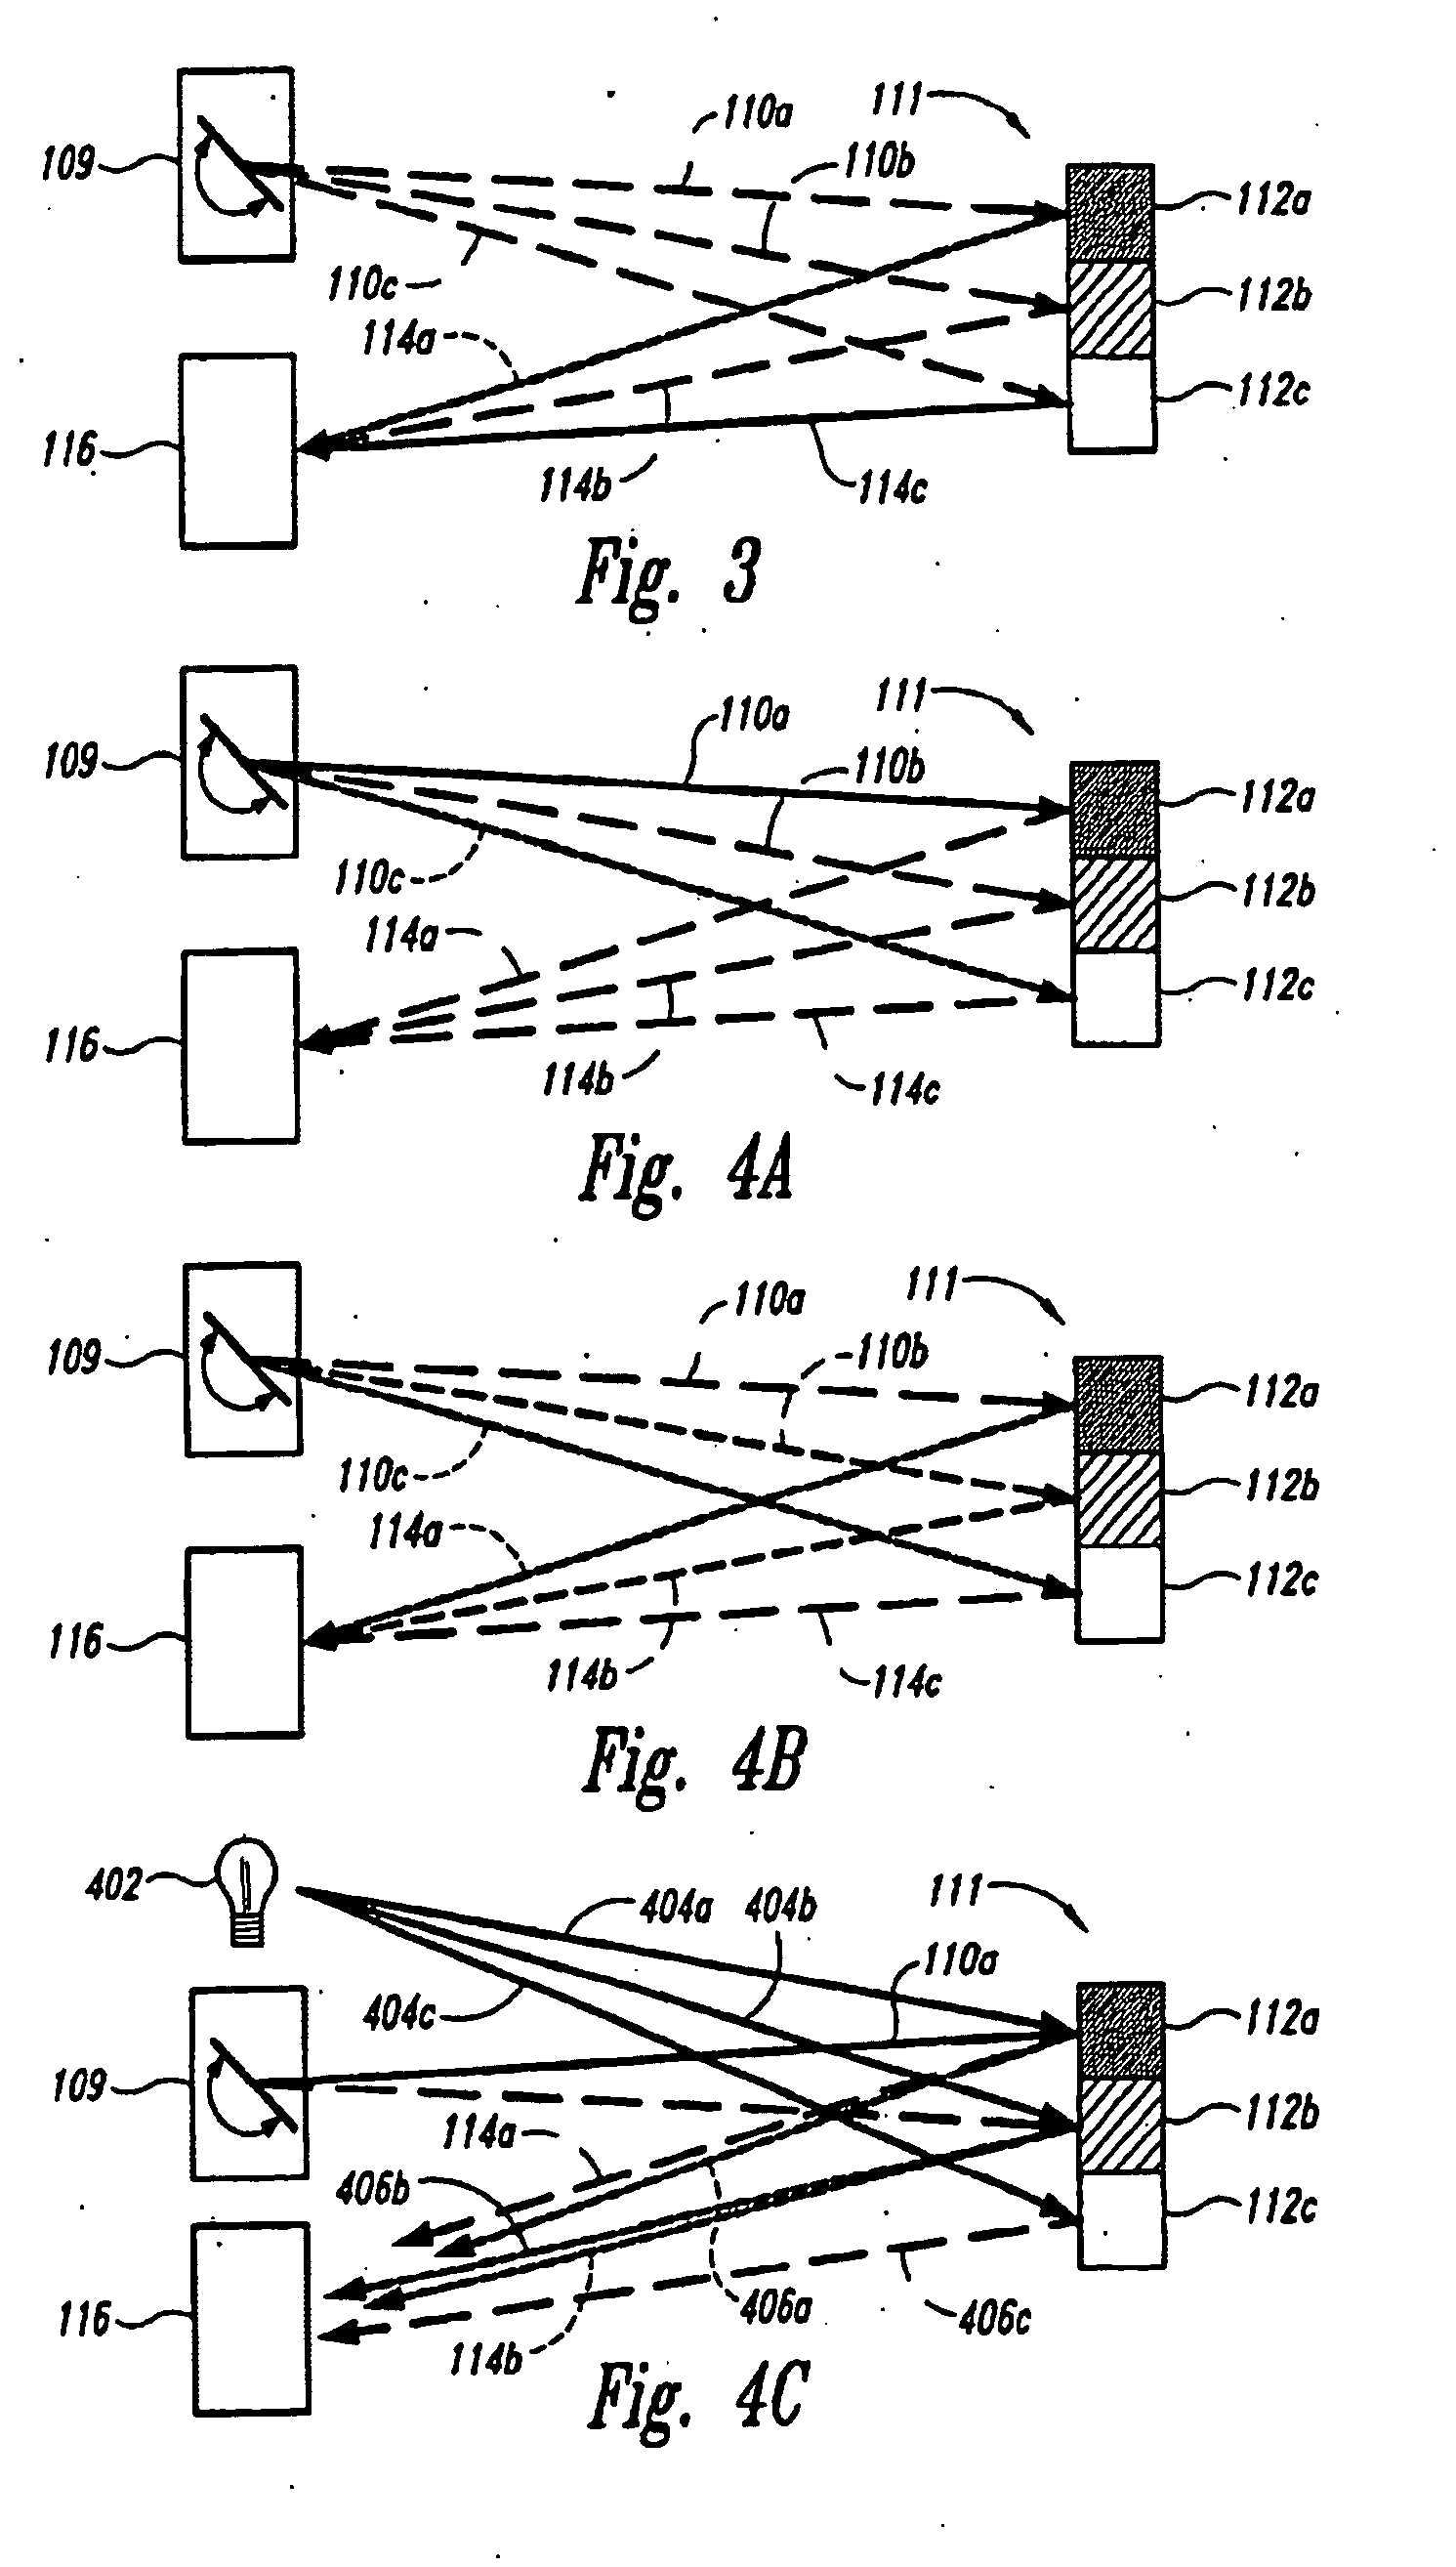 Apparatus and method for projecting a variable pattern of electromagnetic energy